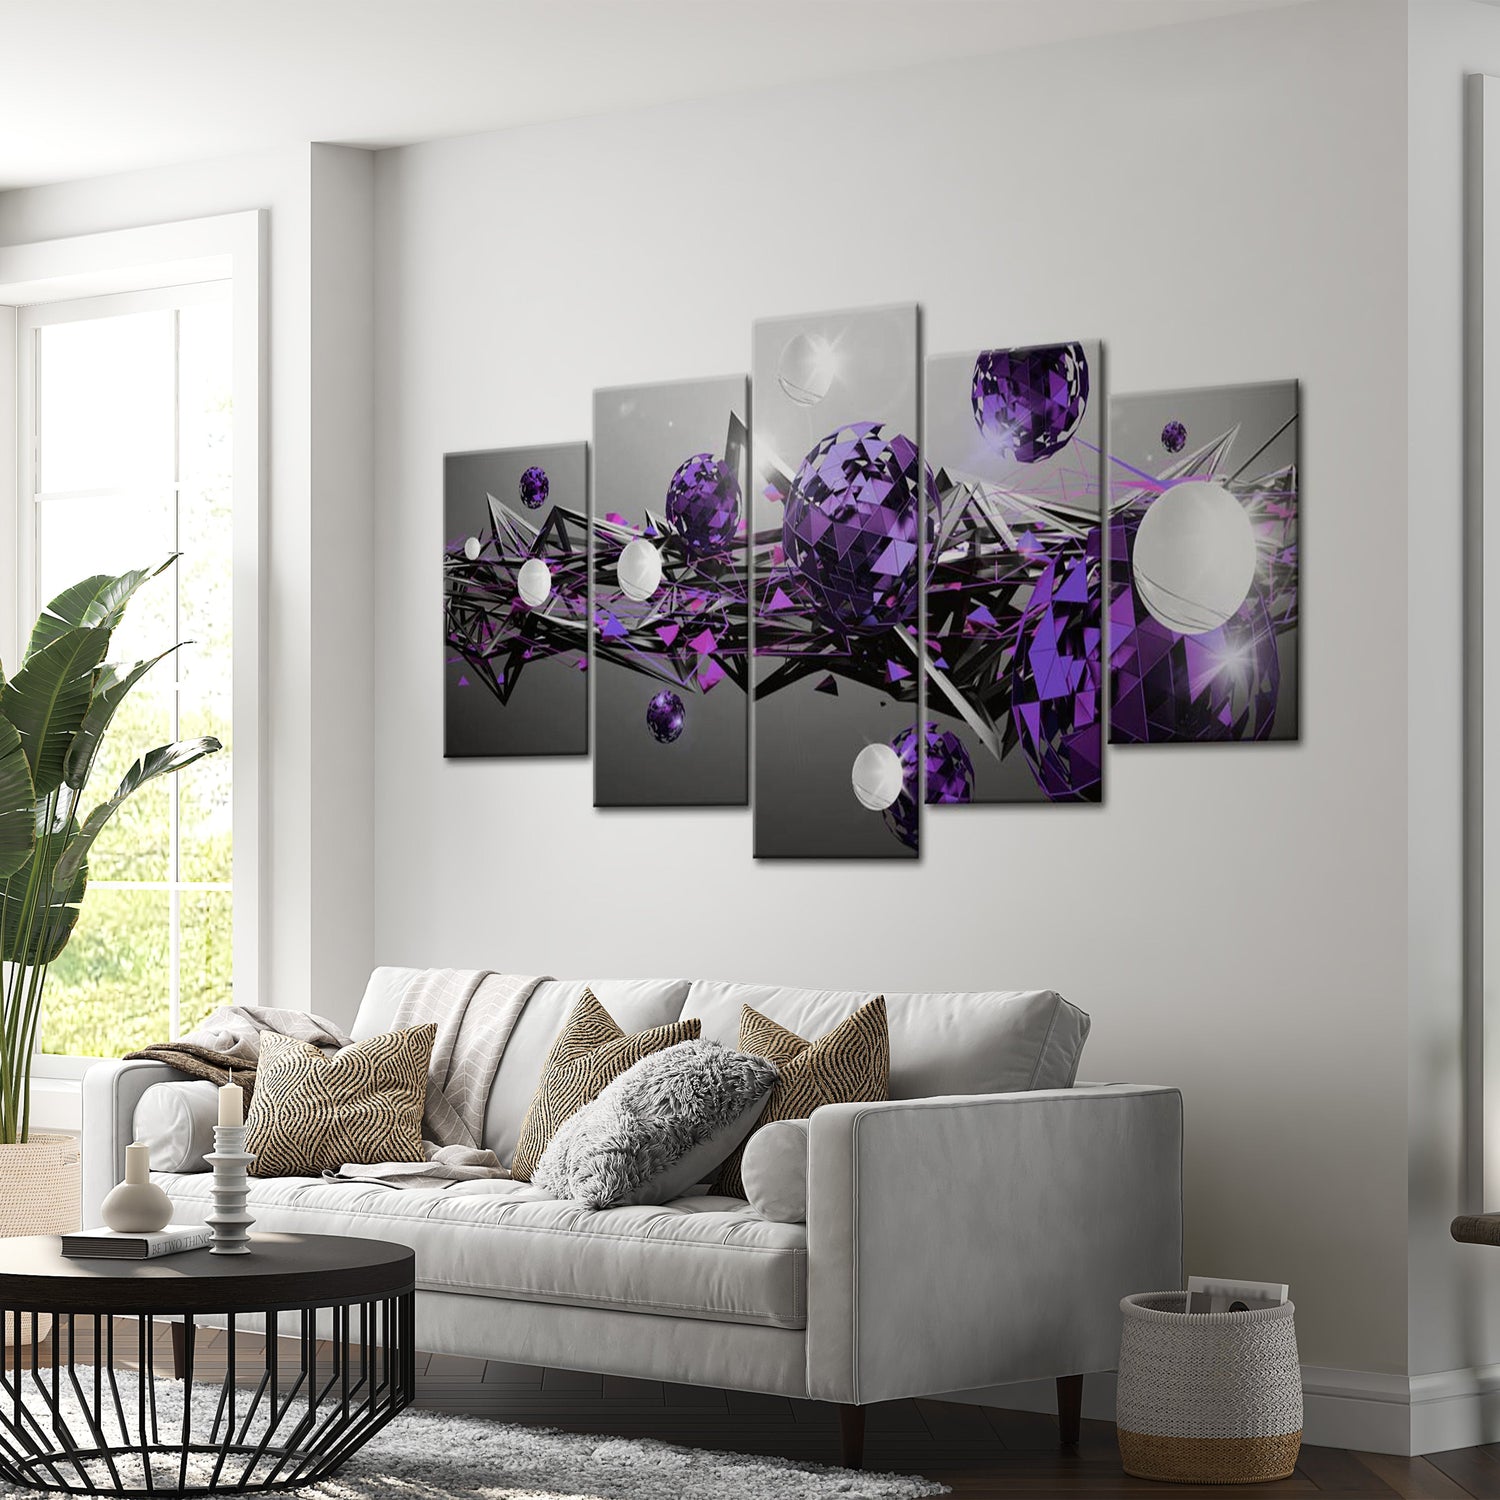 Glamour Canvas Wall Art - Purple Solar System - 5 Pieces